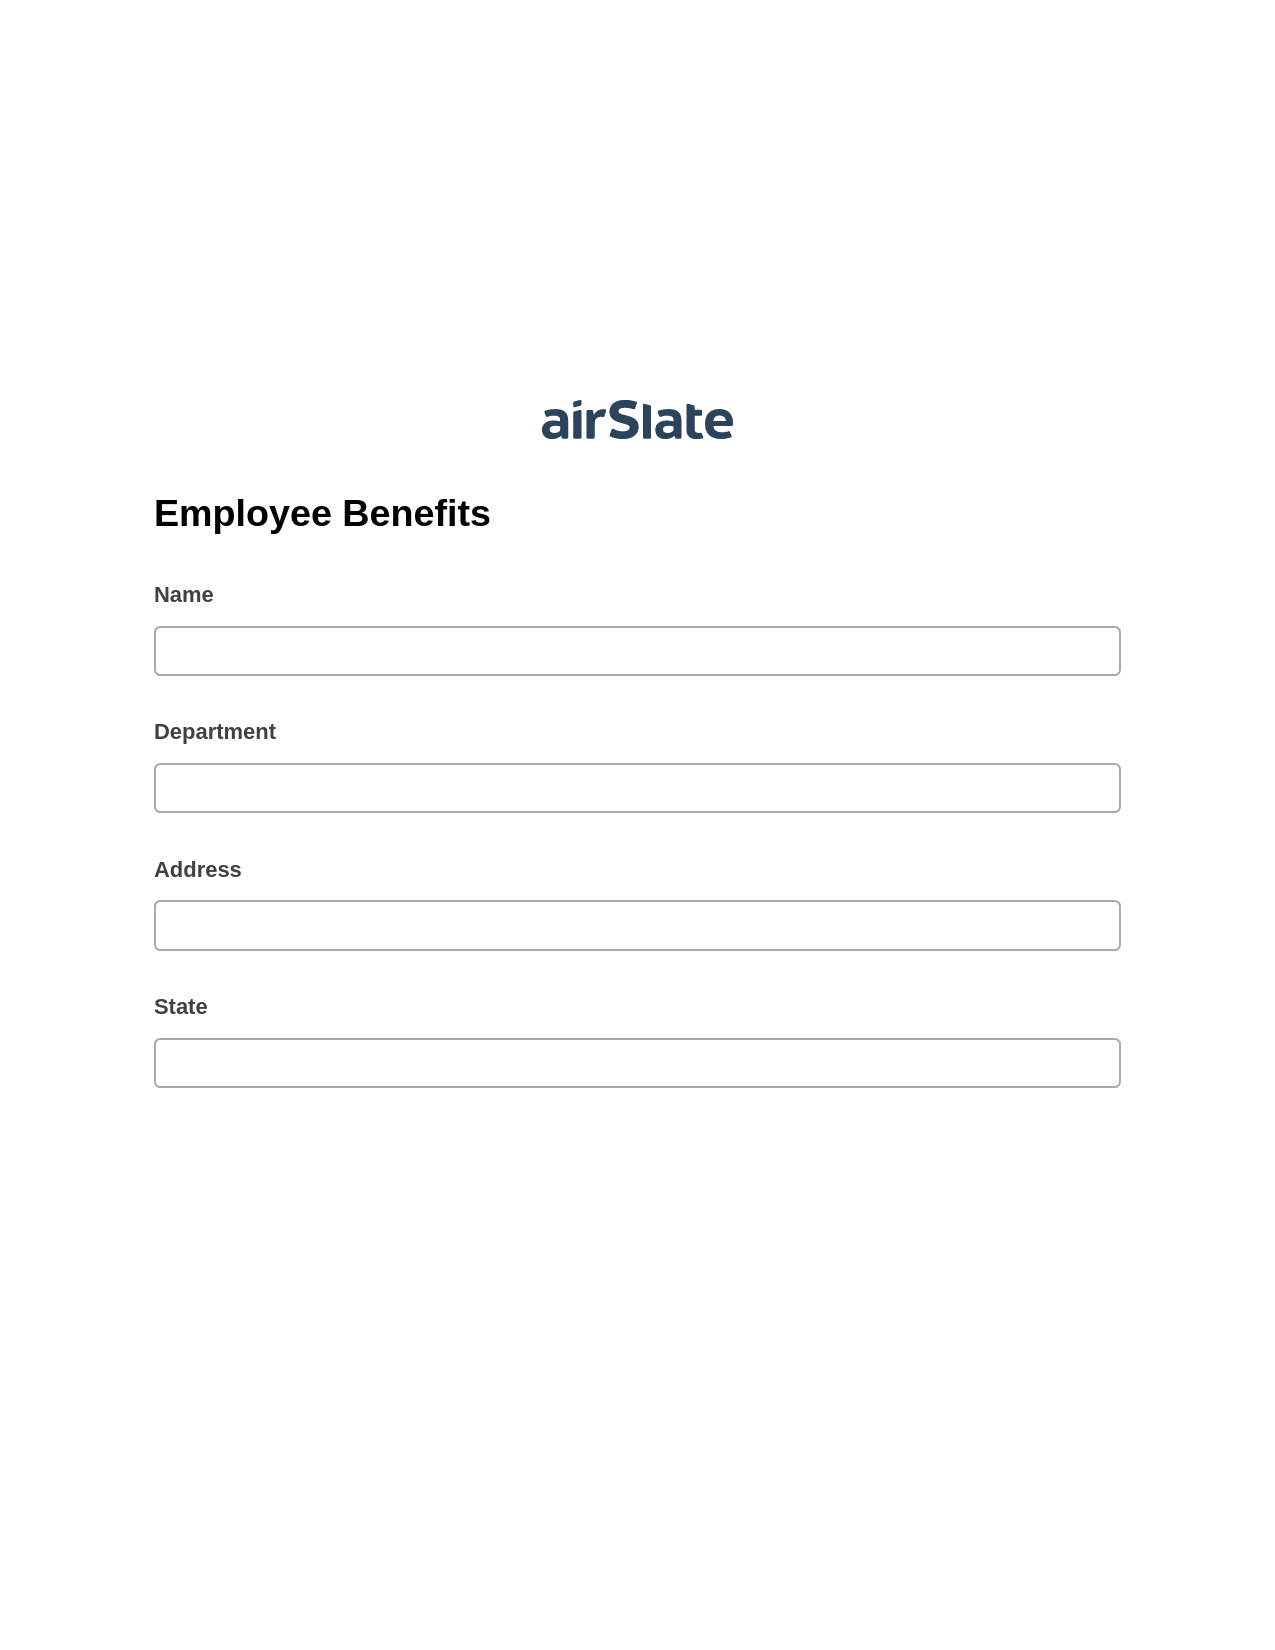 Employee Benefits Pre-fill Slate from MS Dynamics 365 Records Bot, Unassign Role Bot, Post-finish Document Bot